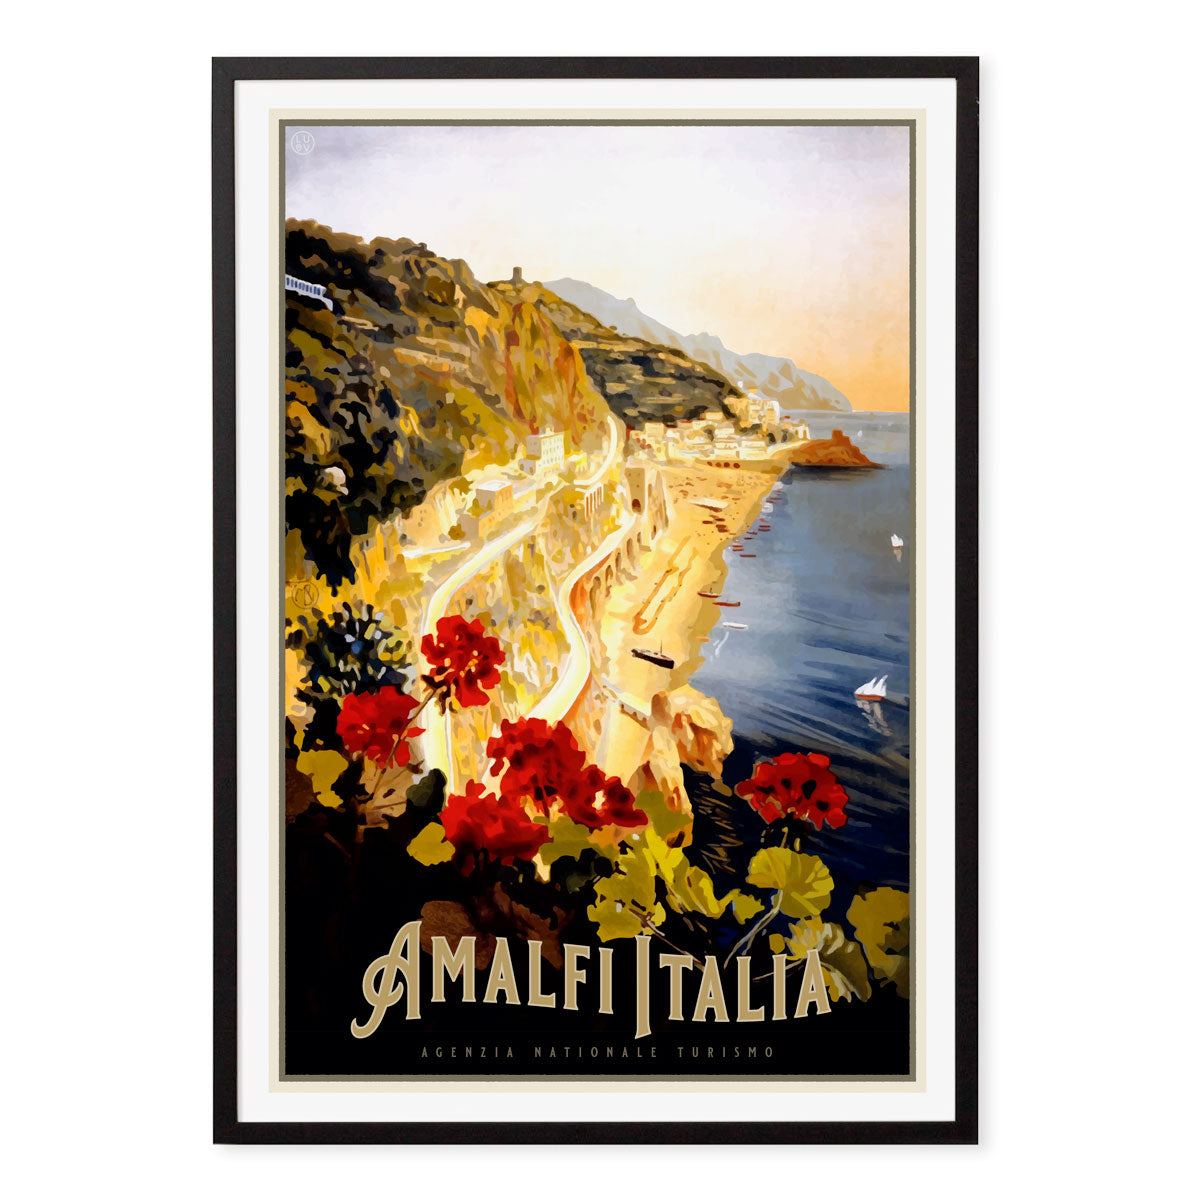 Amalfi retro vintage travel poster in black frame from Places We Luv